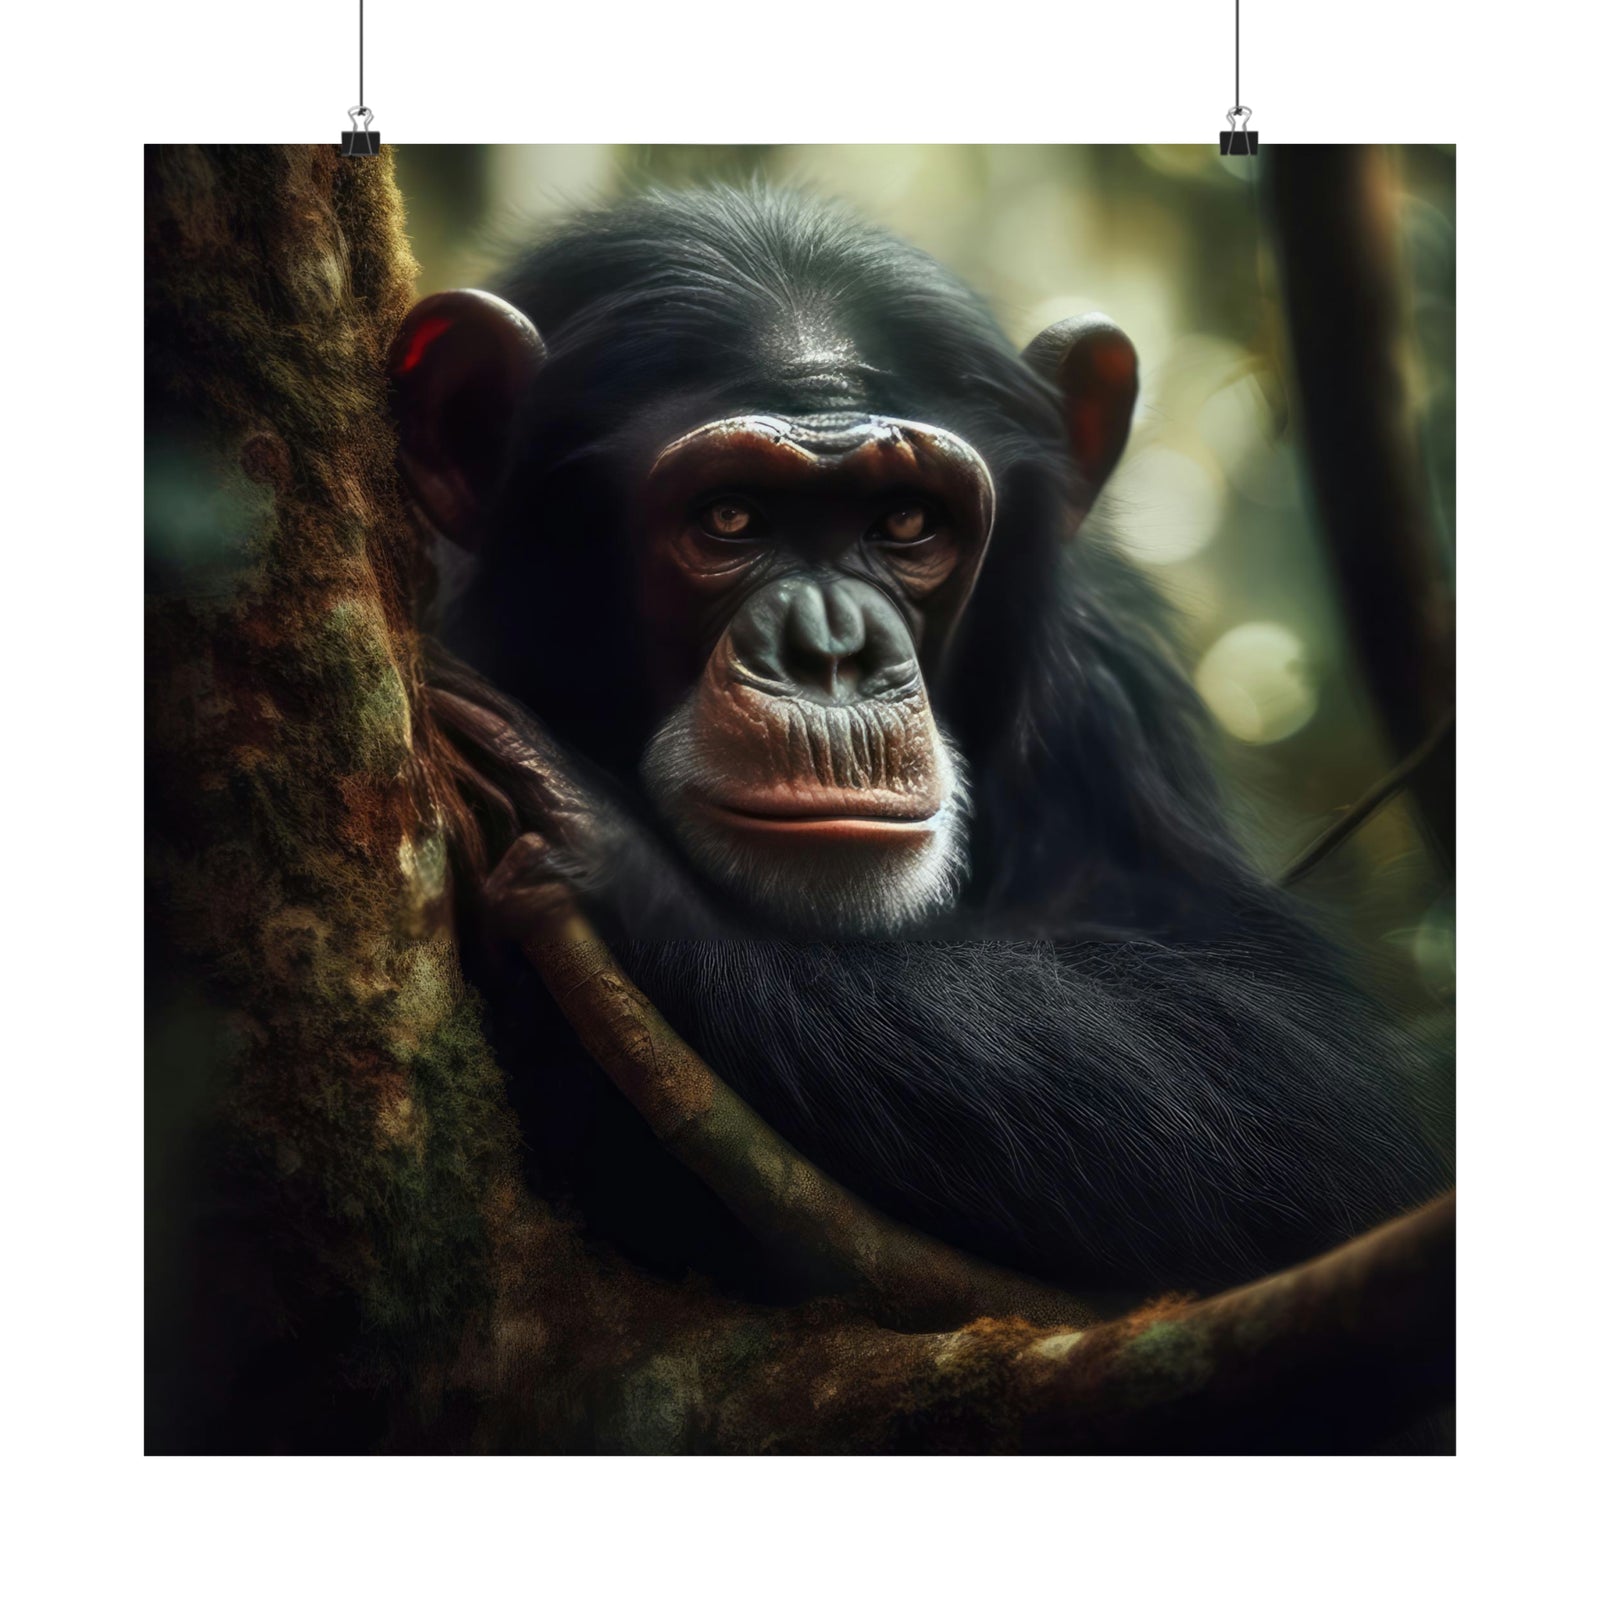 A Wild Primate's Paradise Poster